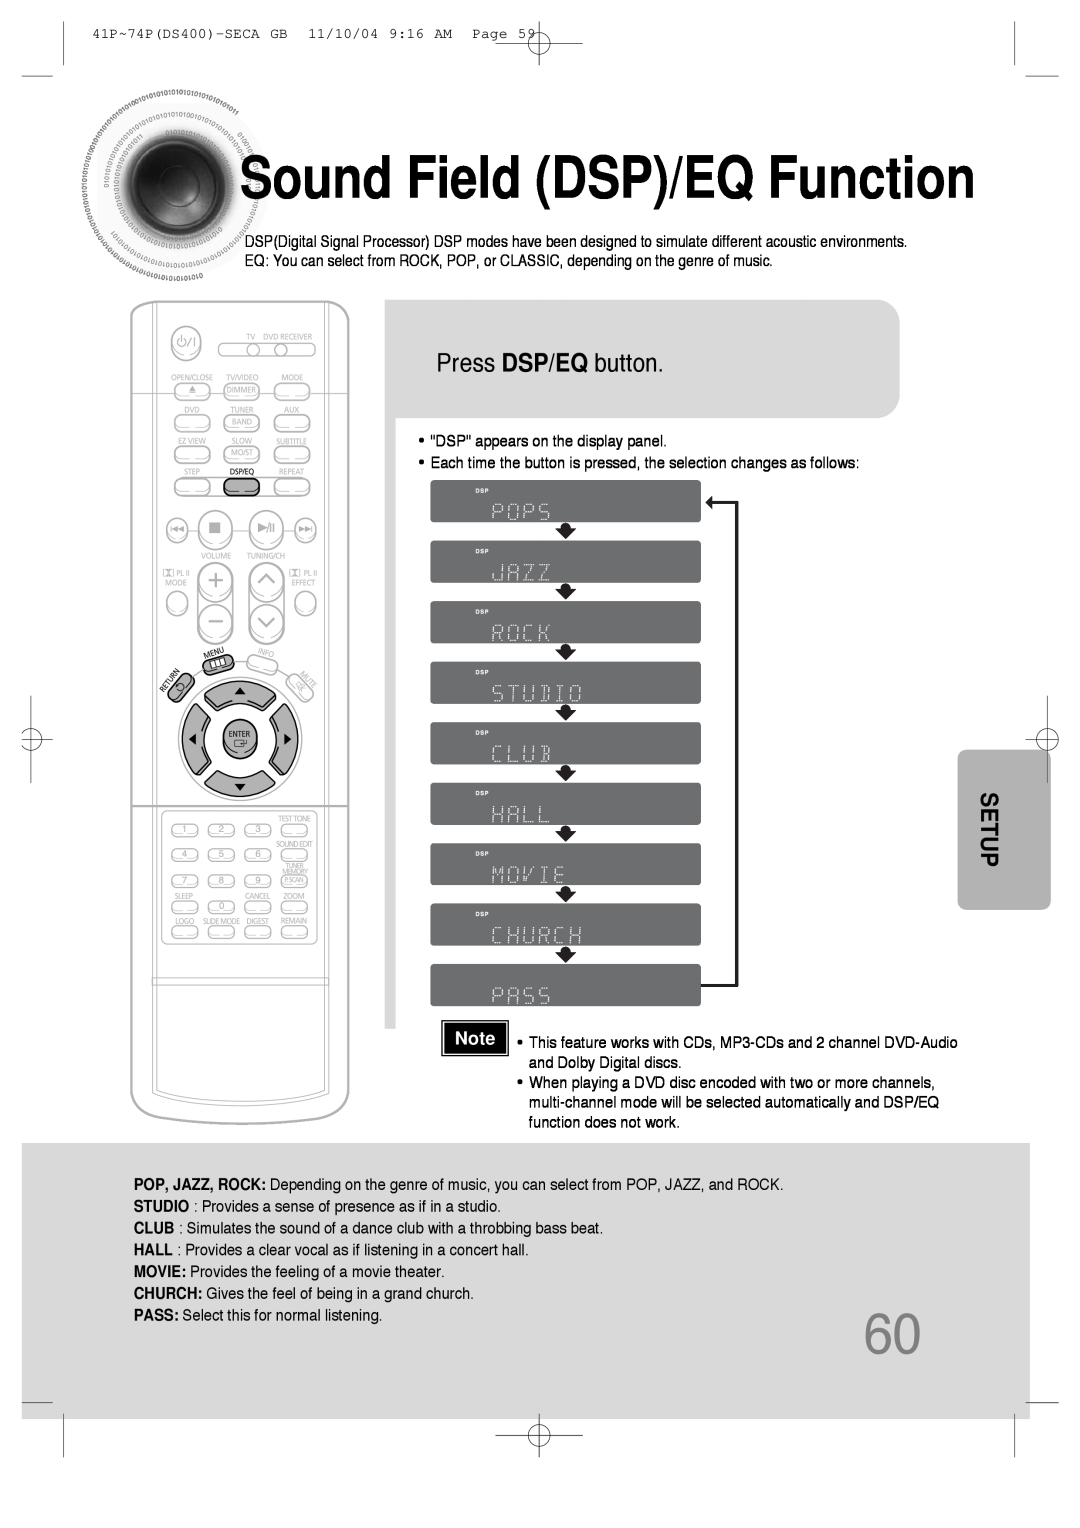 Samsung HT-DS400 SoundField DSP/EQ Function, Press DSP/EQ button, Setup, MOVIE: Provides the feeling of a movie theater 